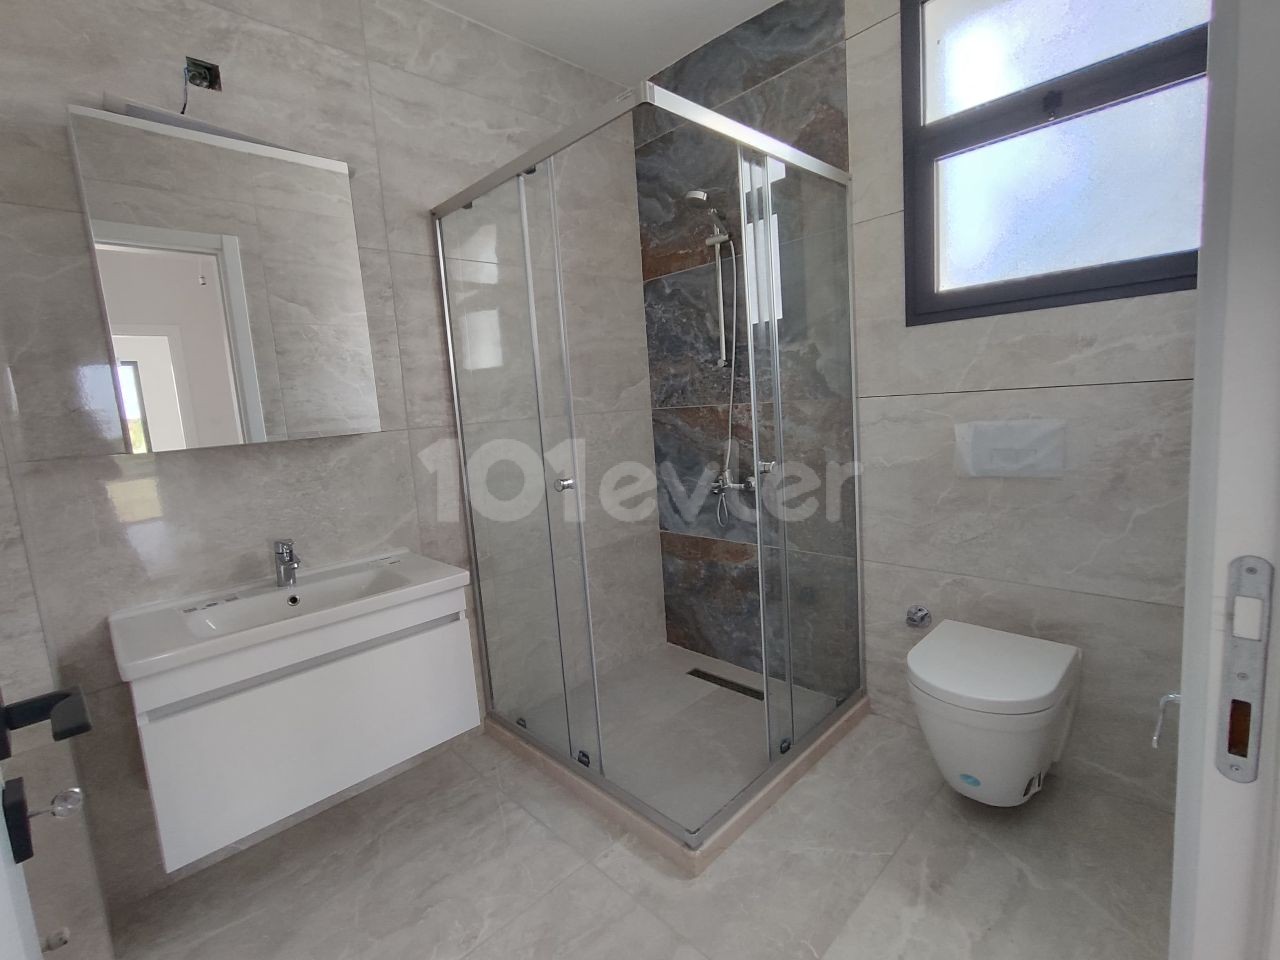 3+1 VILLA WITH PRIVATE POOL AT GIRNE ALSANCAK AT OPPORTUNITY PRICE